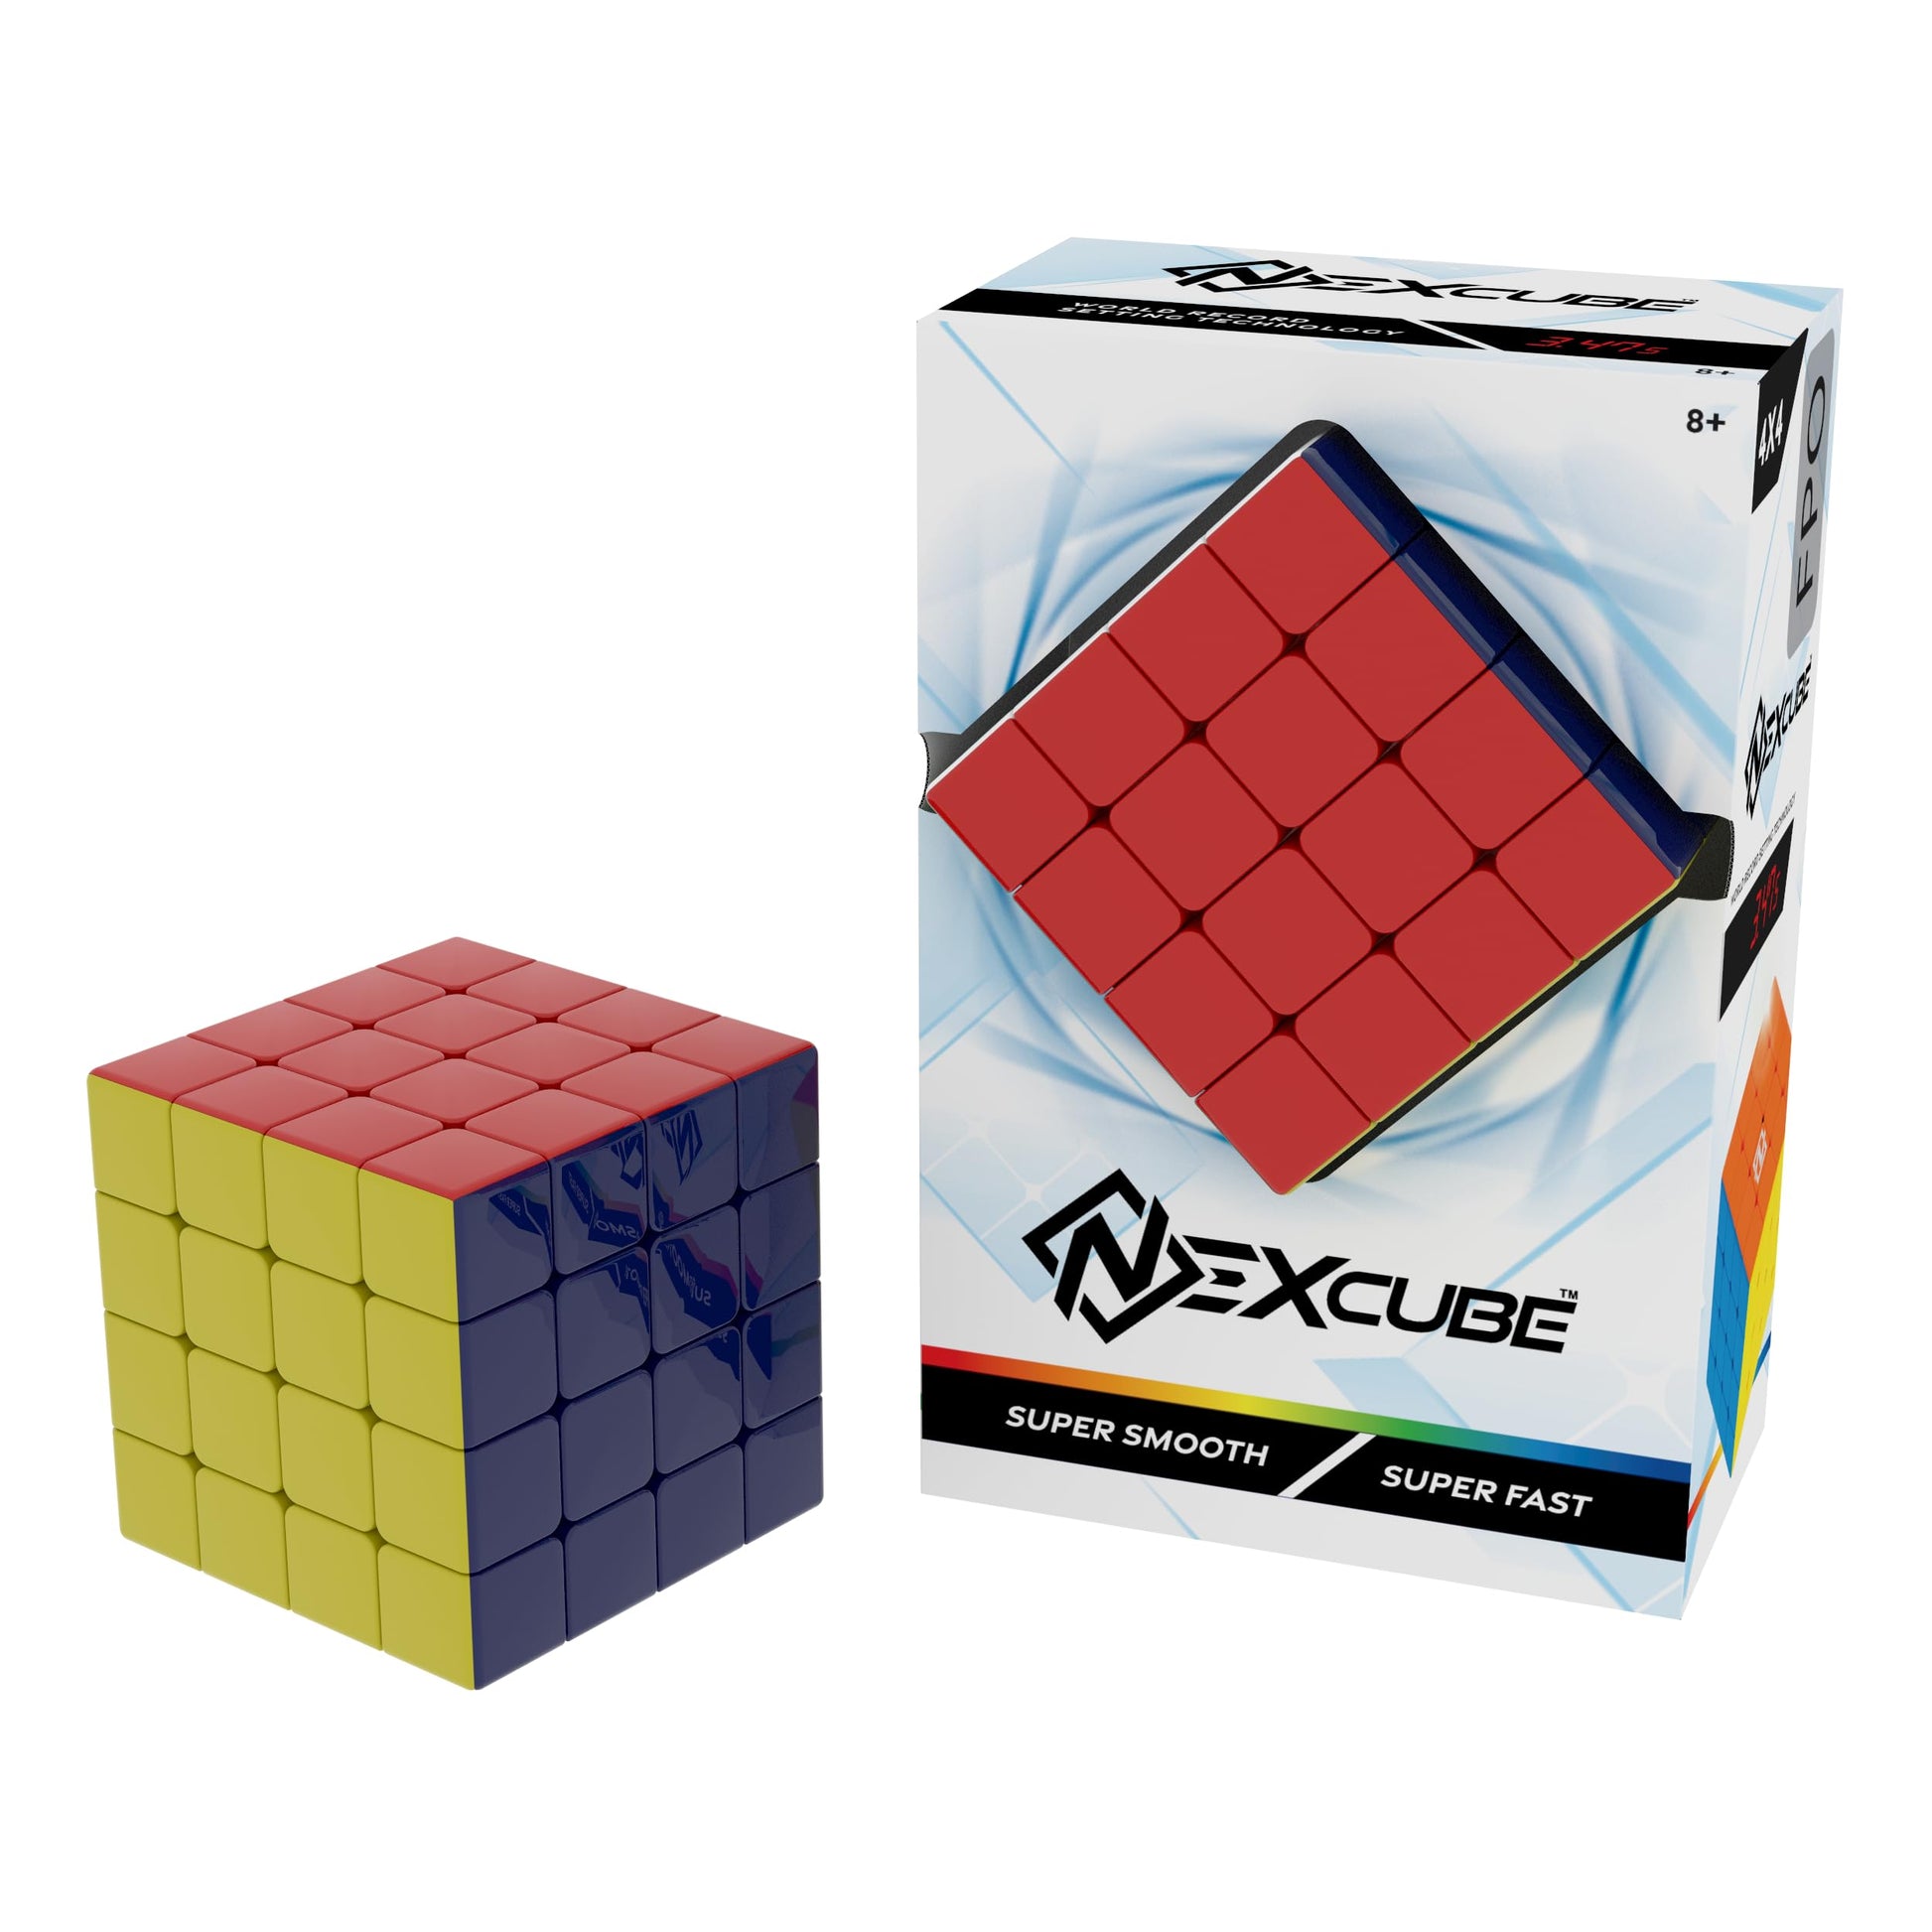 Goliath NEXcube 4x4 Classic - Stickerless Speed Cube - Super Smooth Technology Unlocks Super Speed to Break Records! - Ages 8 and Up - amzGamess